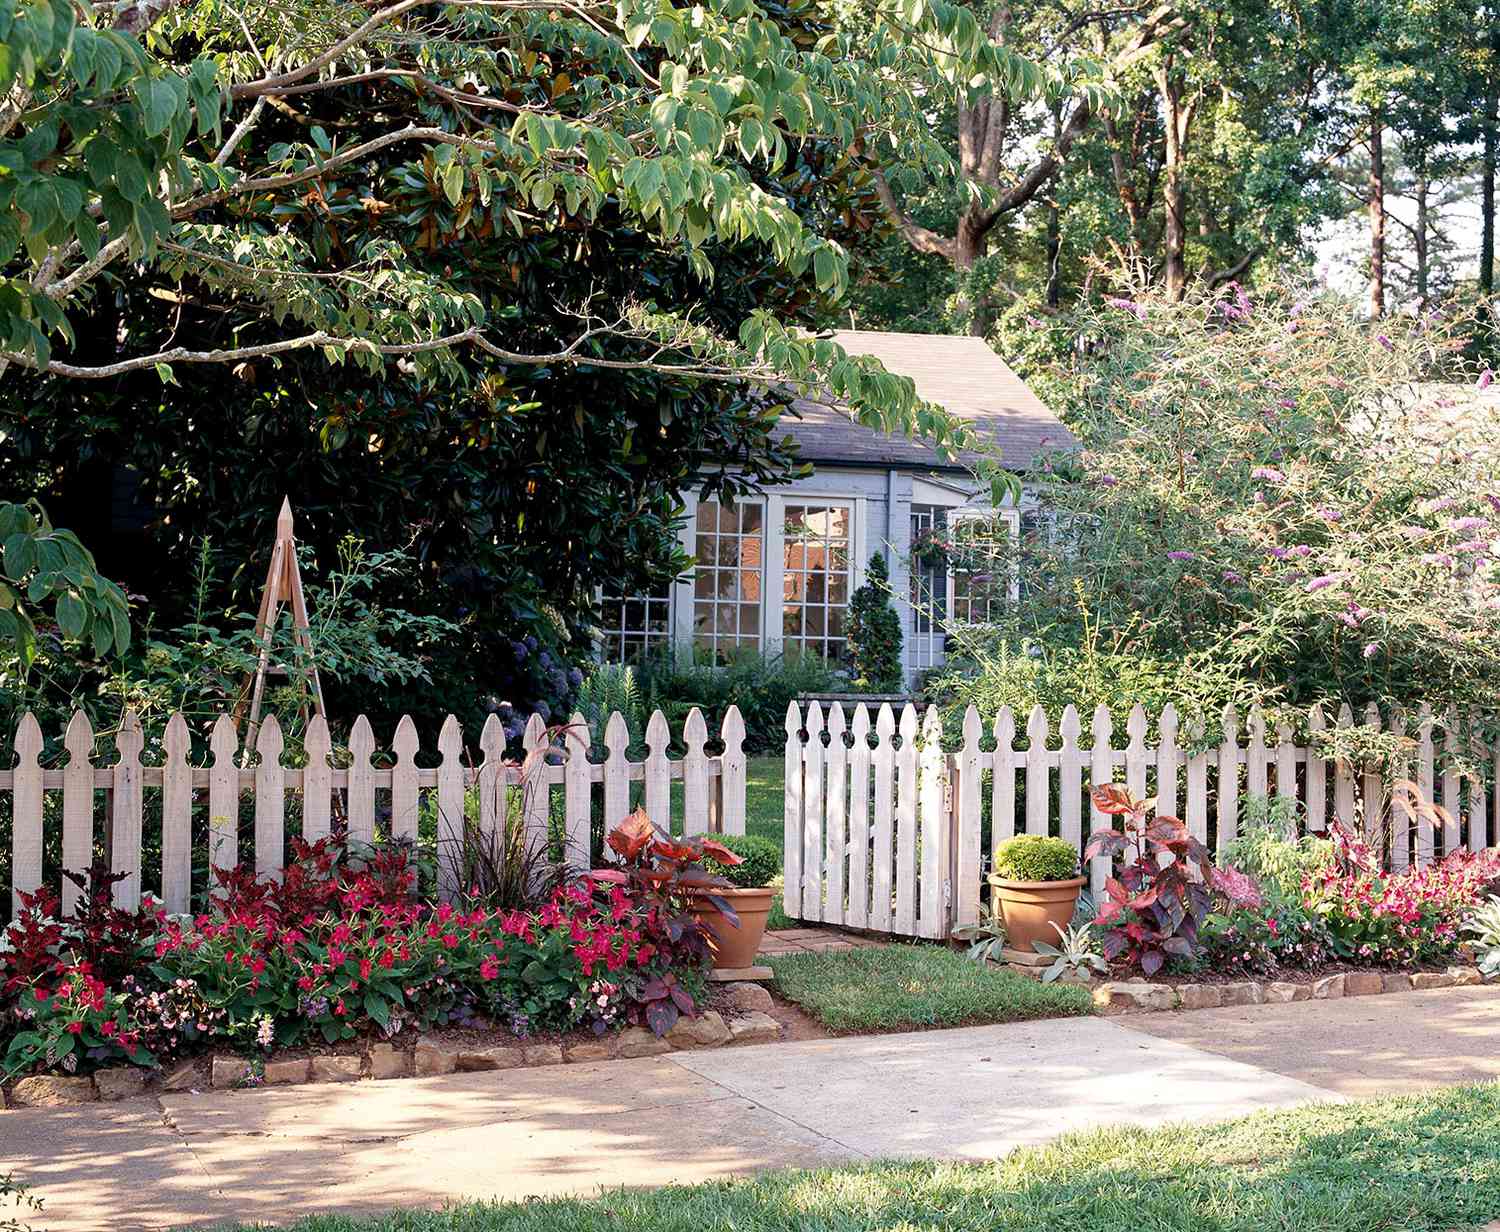 House with white picket fence and plants